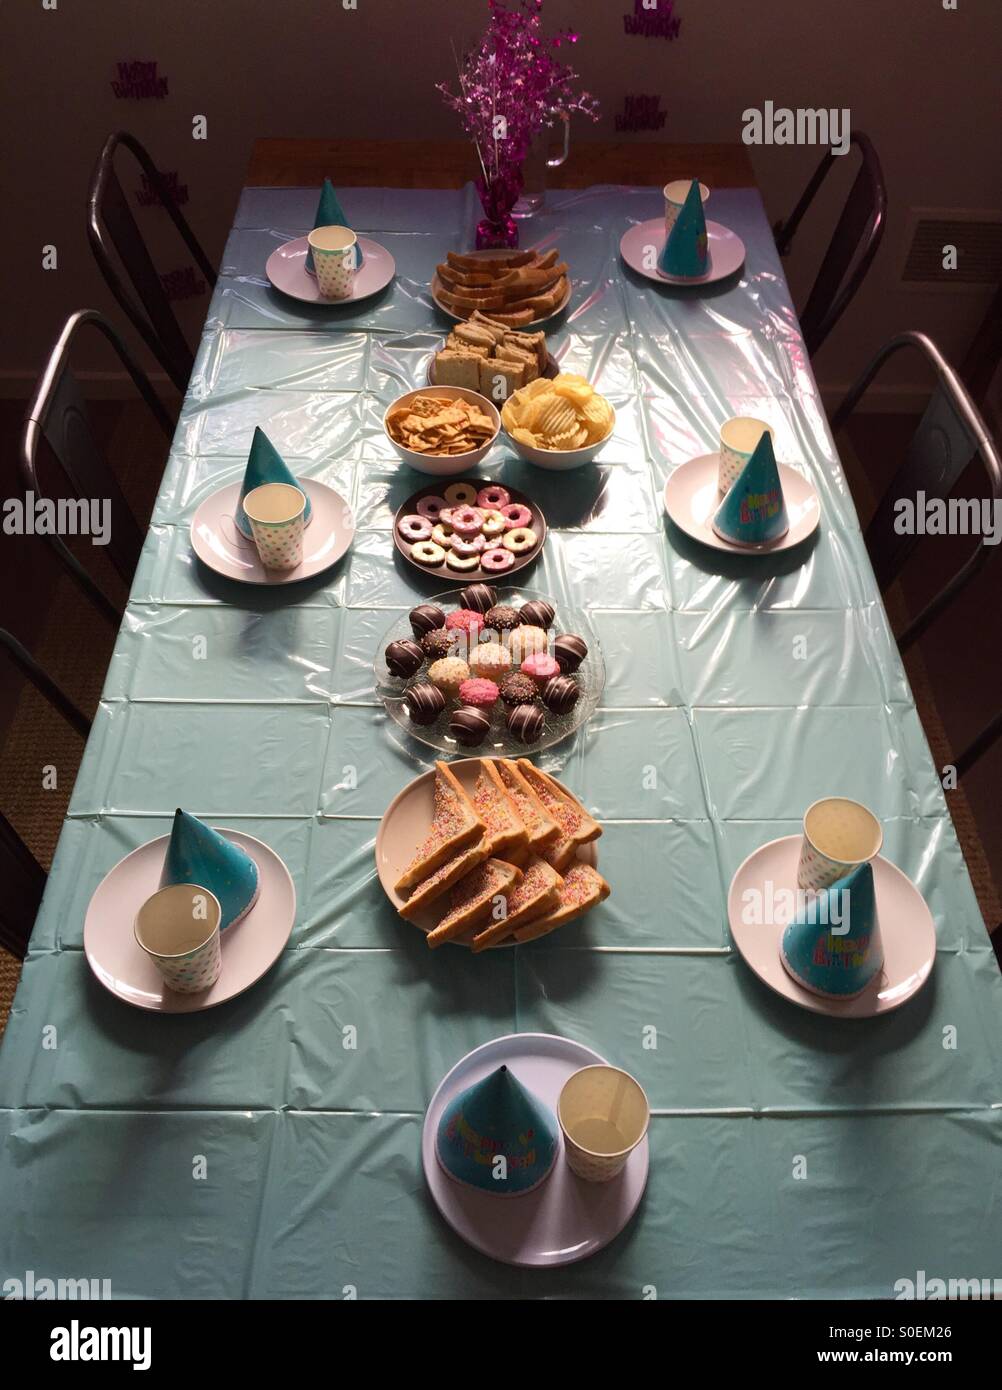 Table set for Children's birthday party Stock Photo